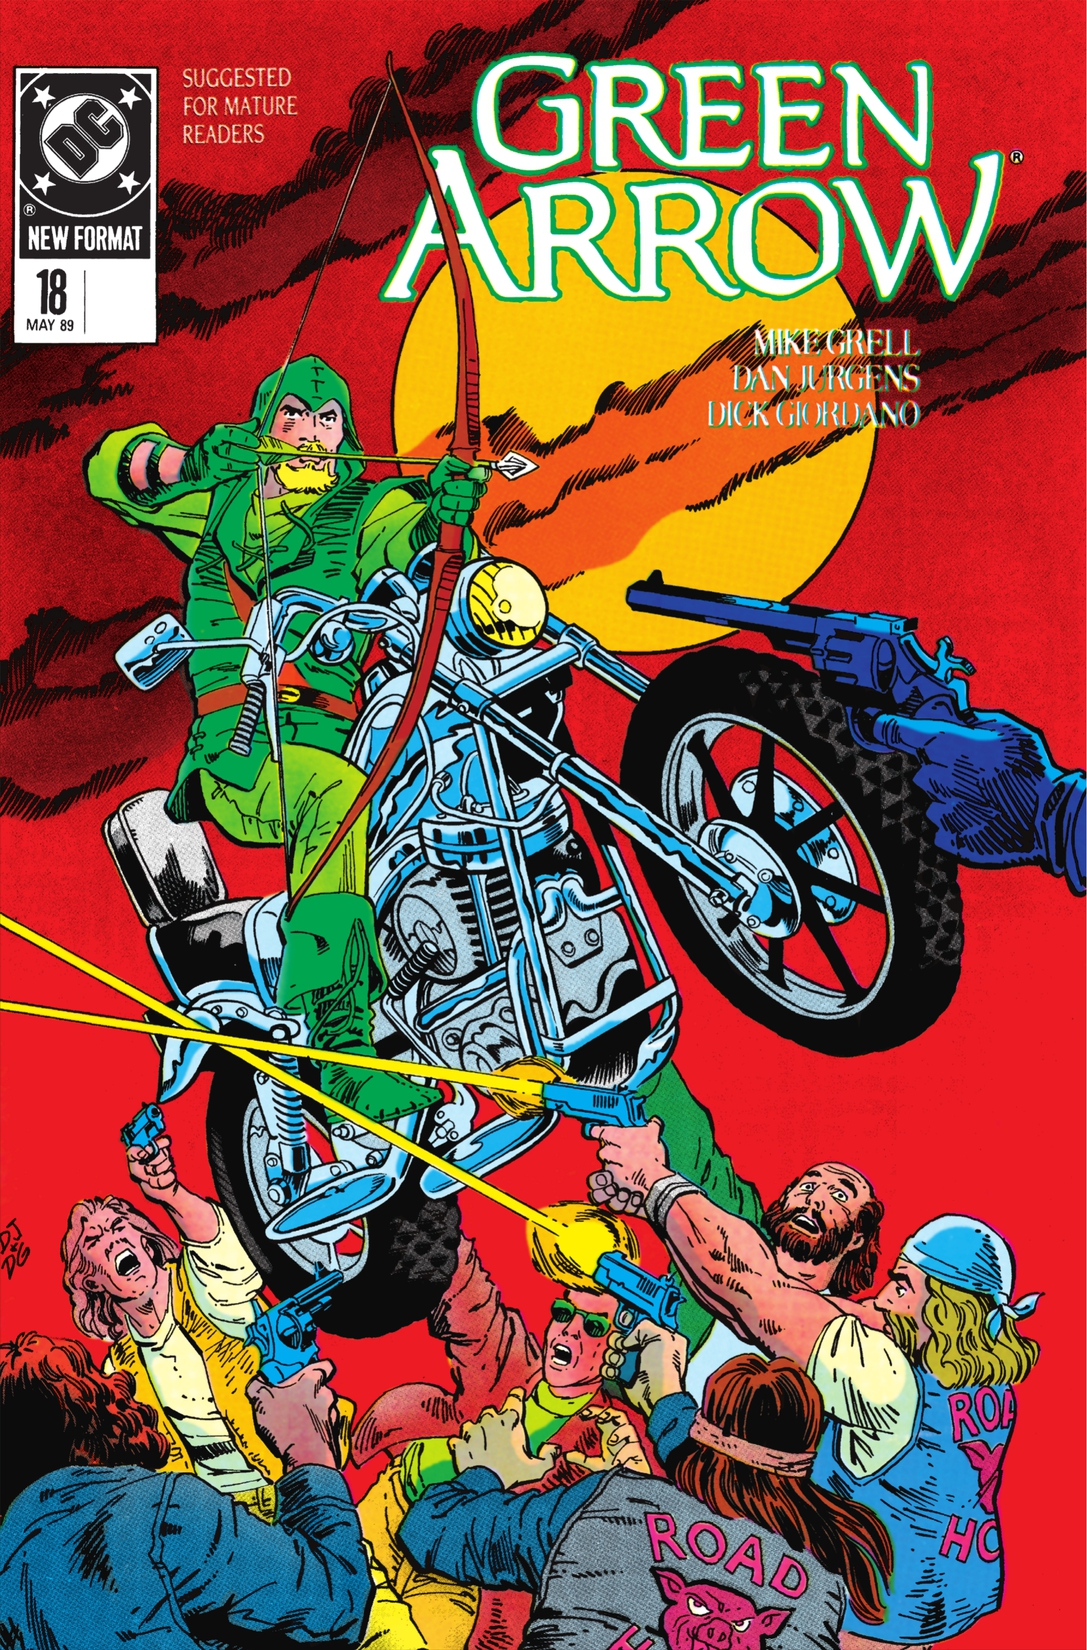 Green Arrow (1987-) #18 preview images